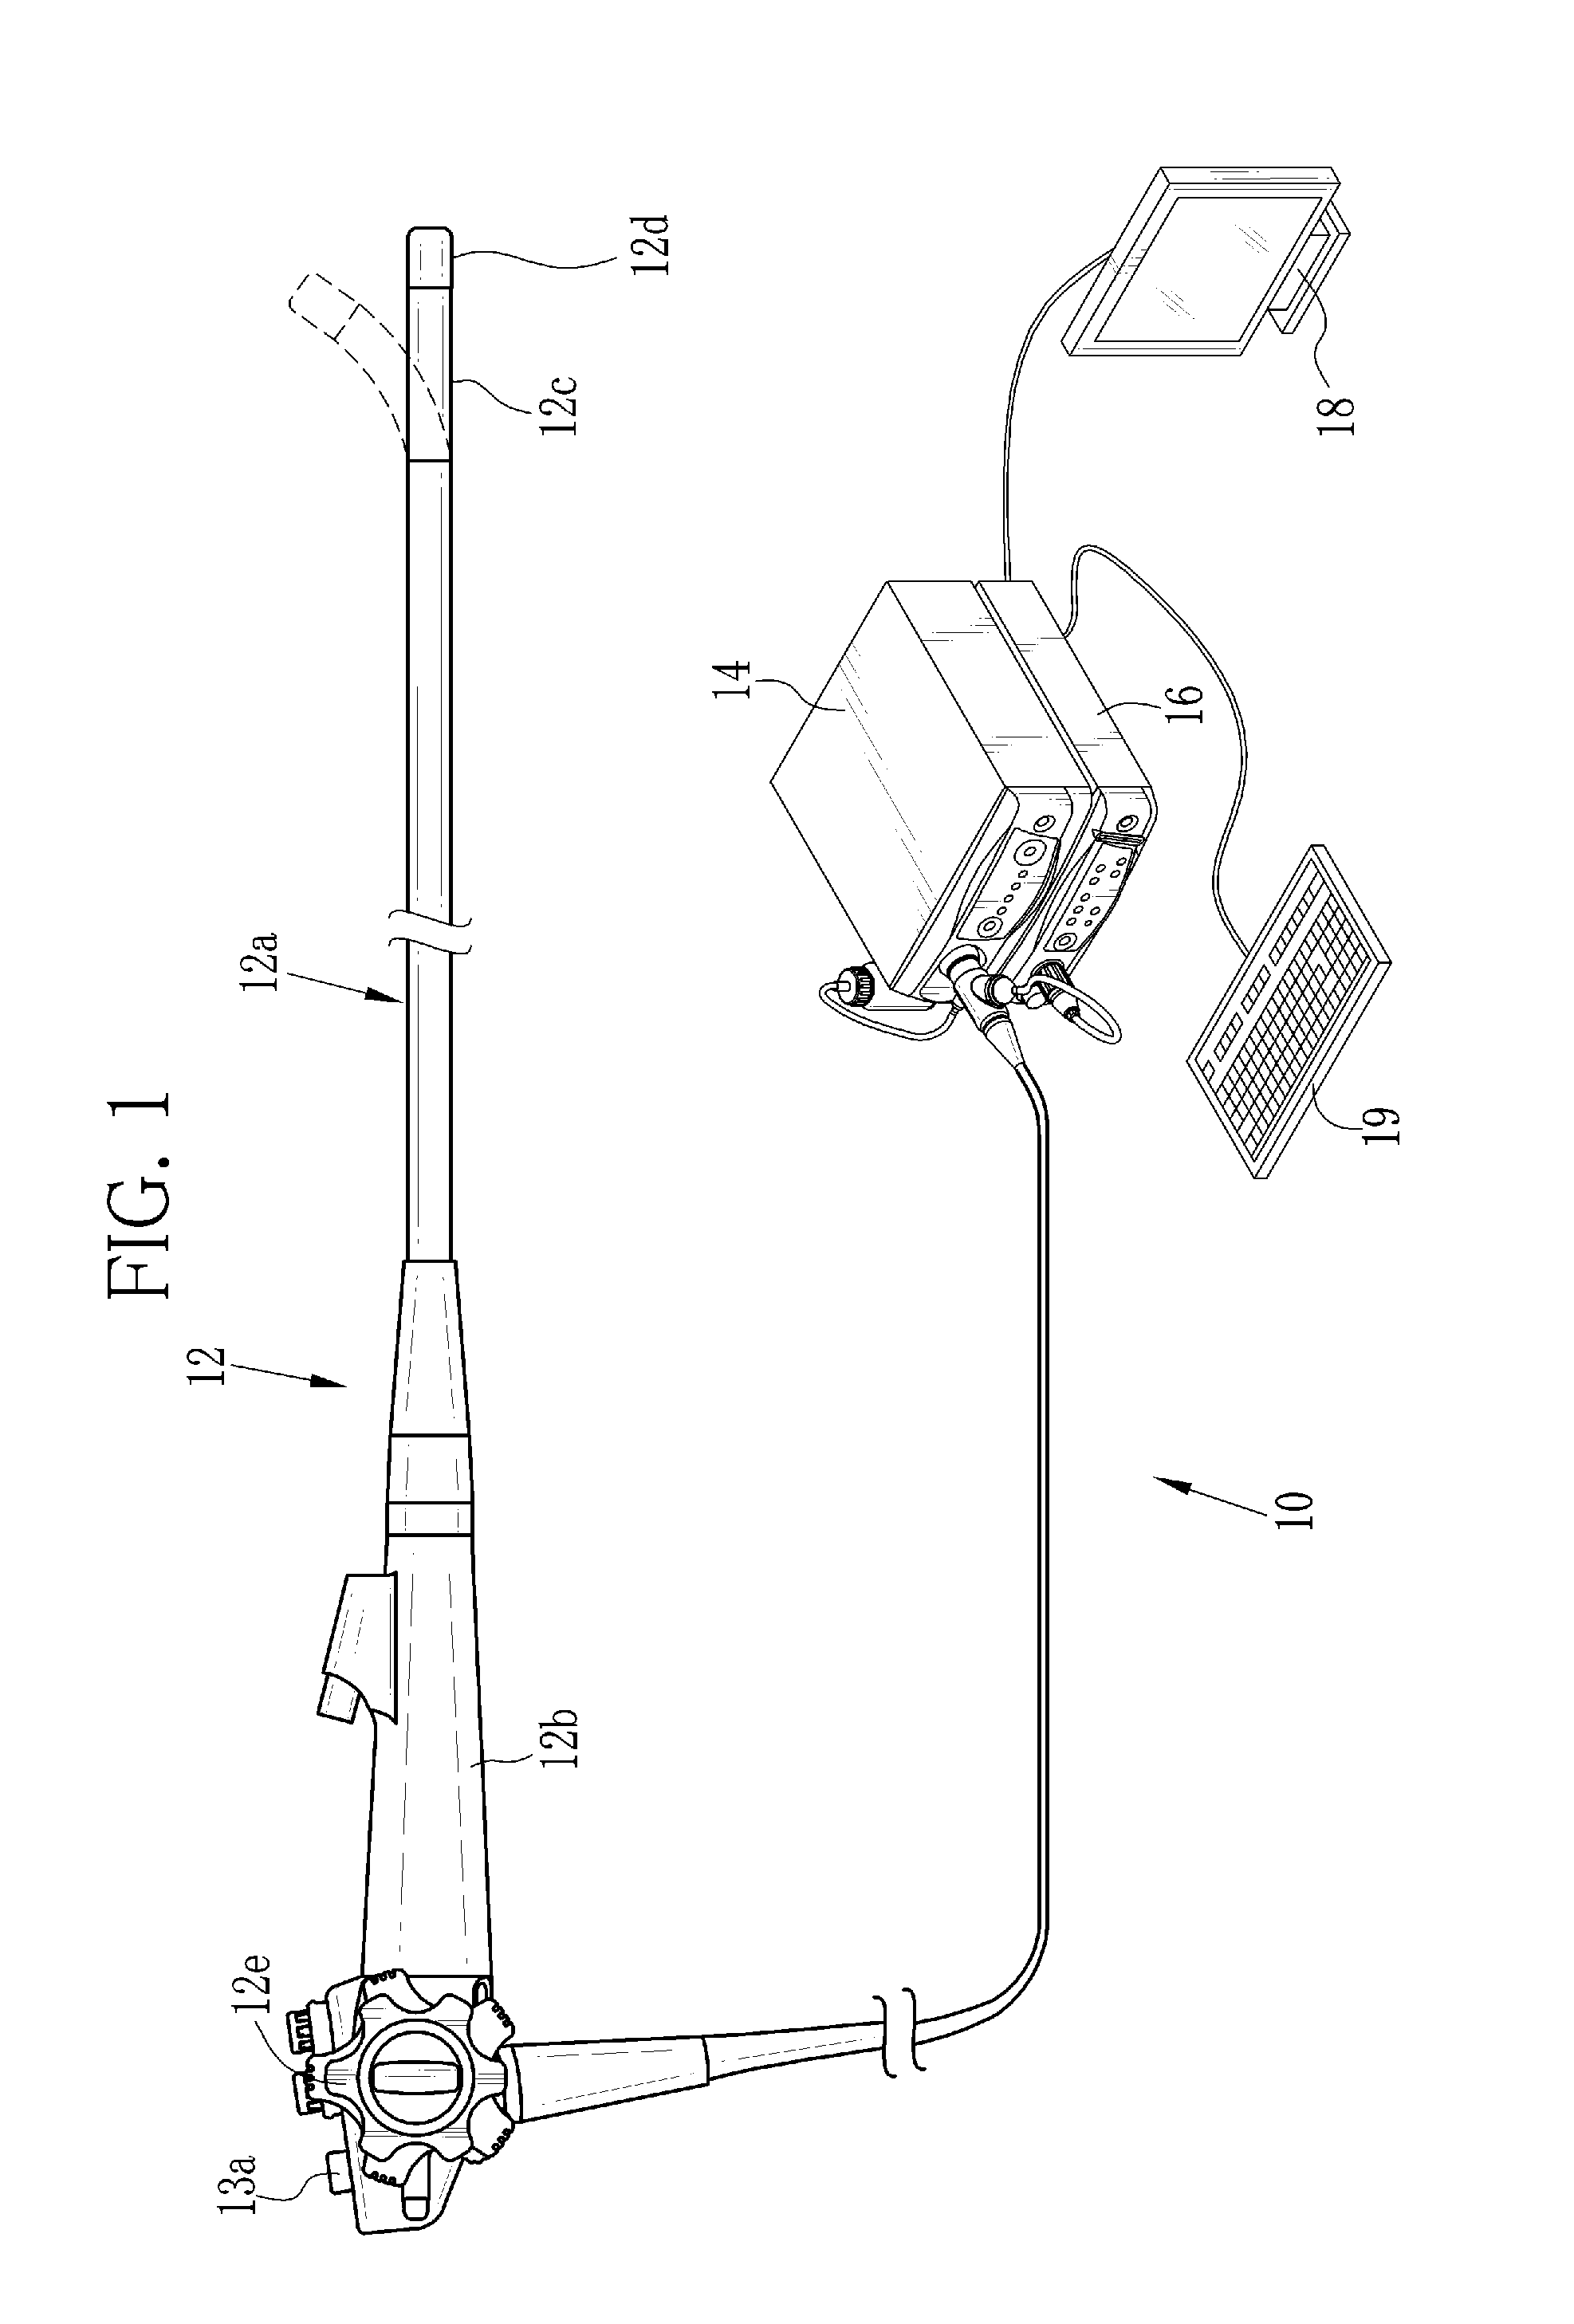 Medical image processing device and method for operating the same